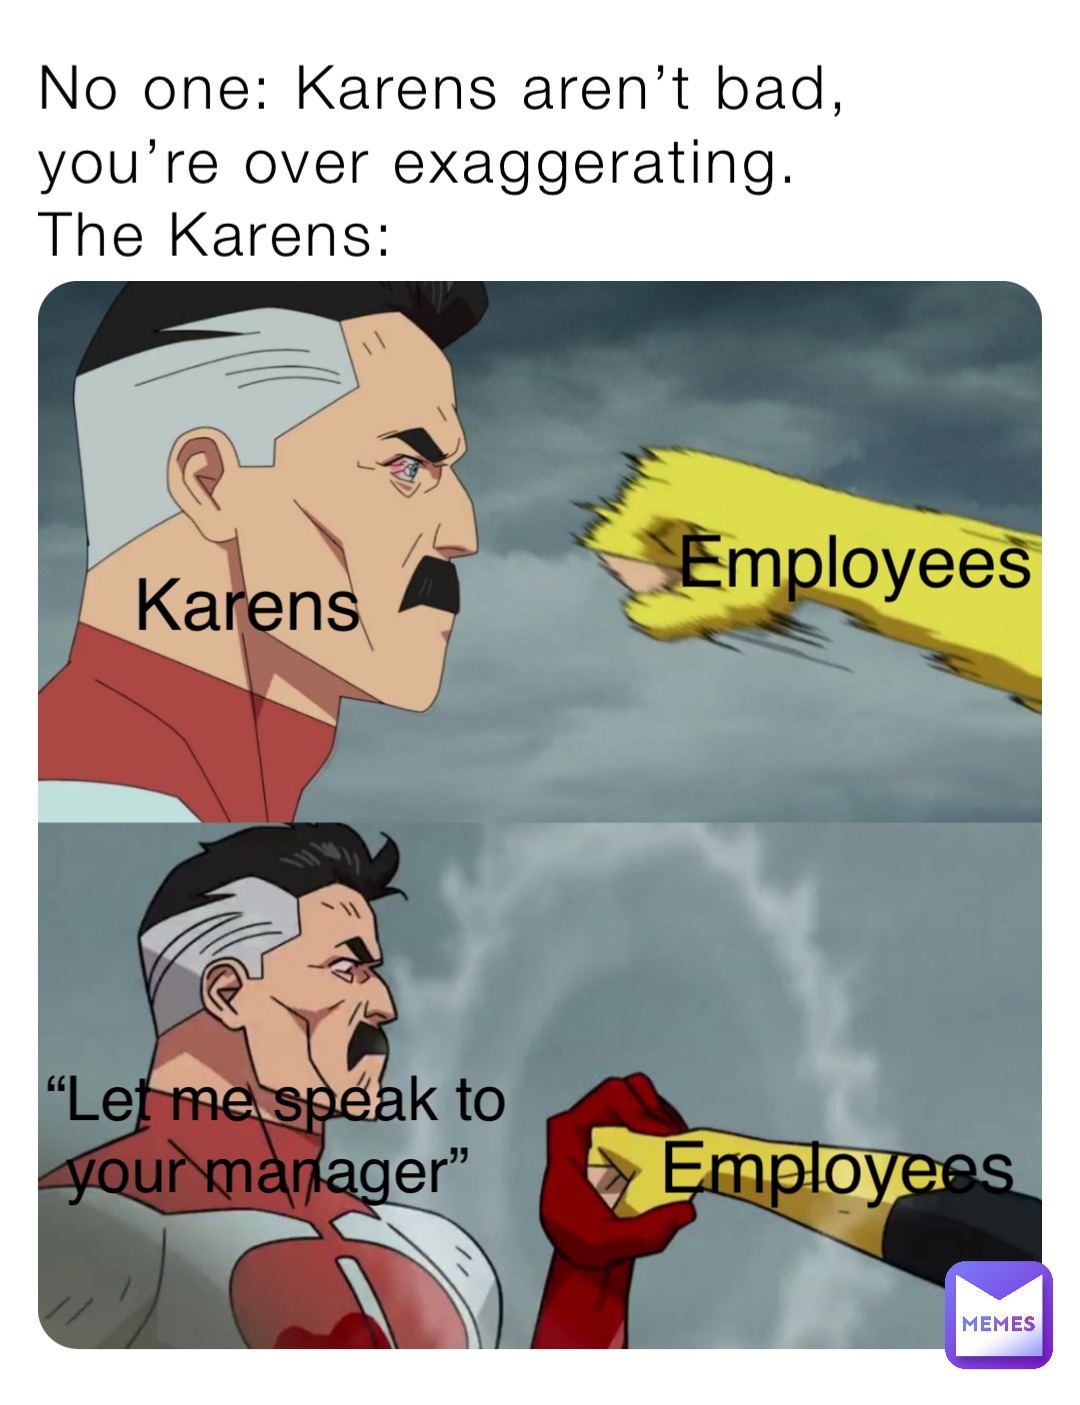 No one: Karens aren’t bad, you’re over exaggerating.
The Karens: Employees Employees “Let me speak to your manager” Karens